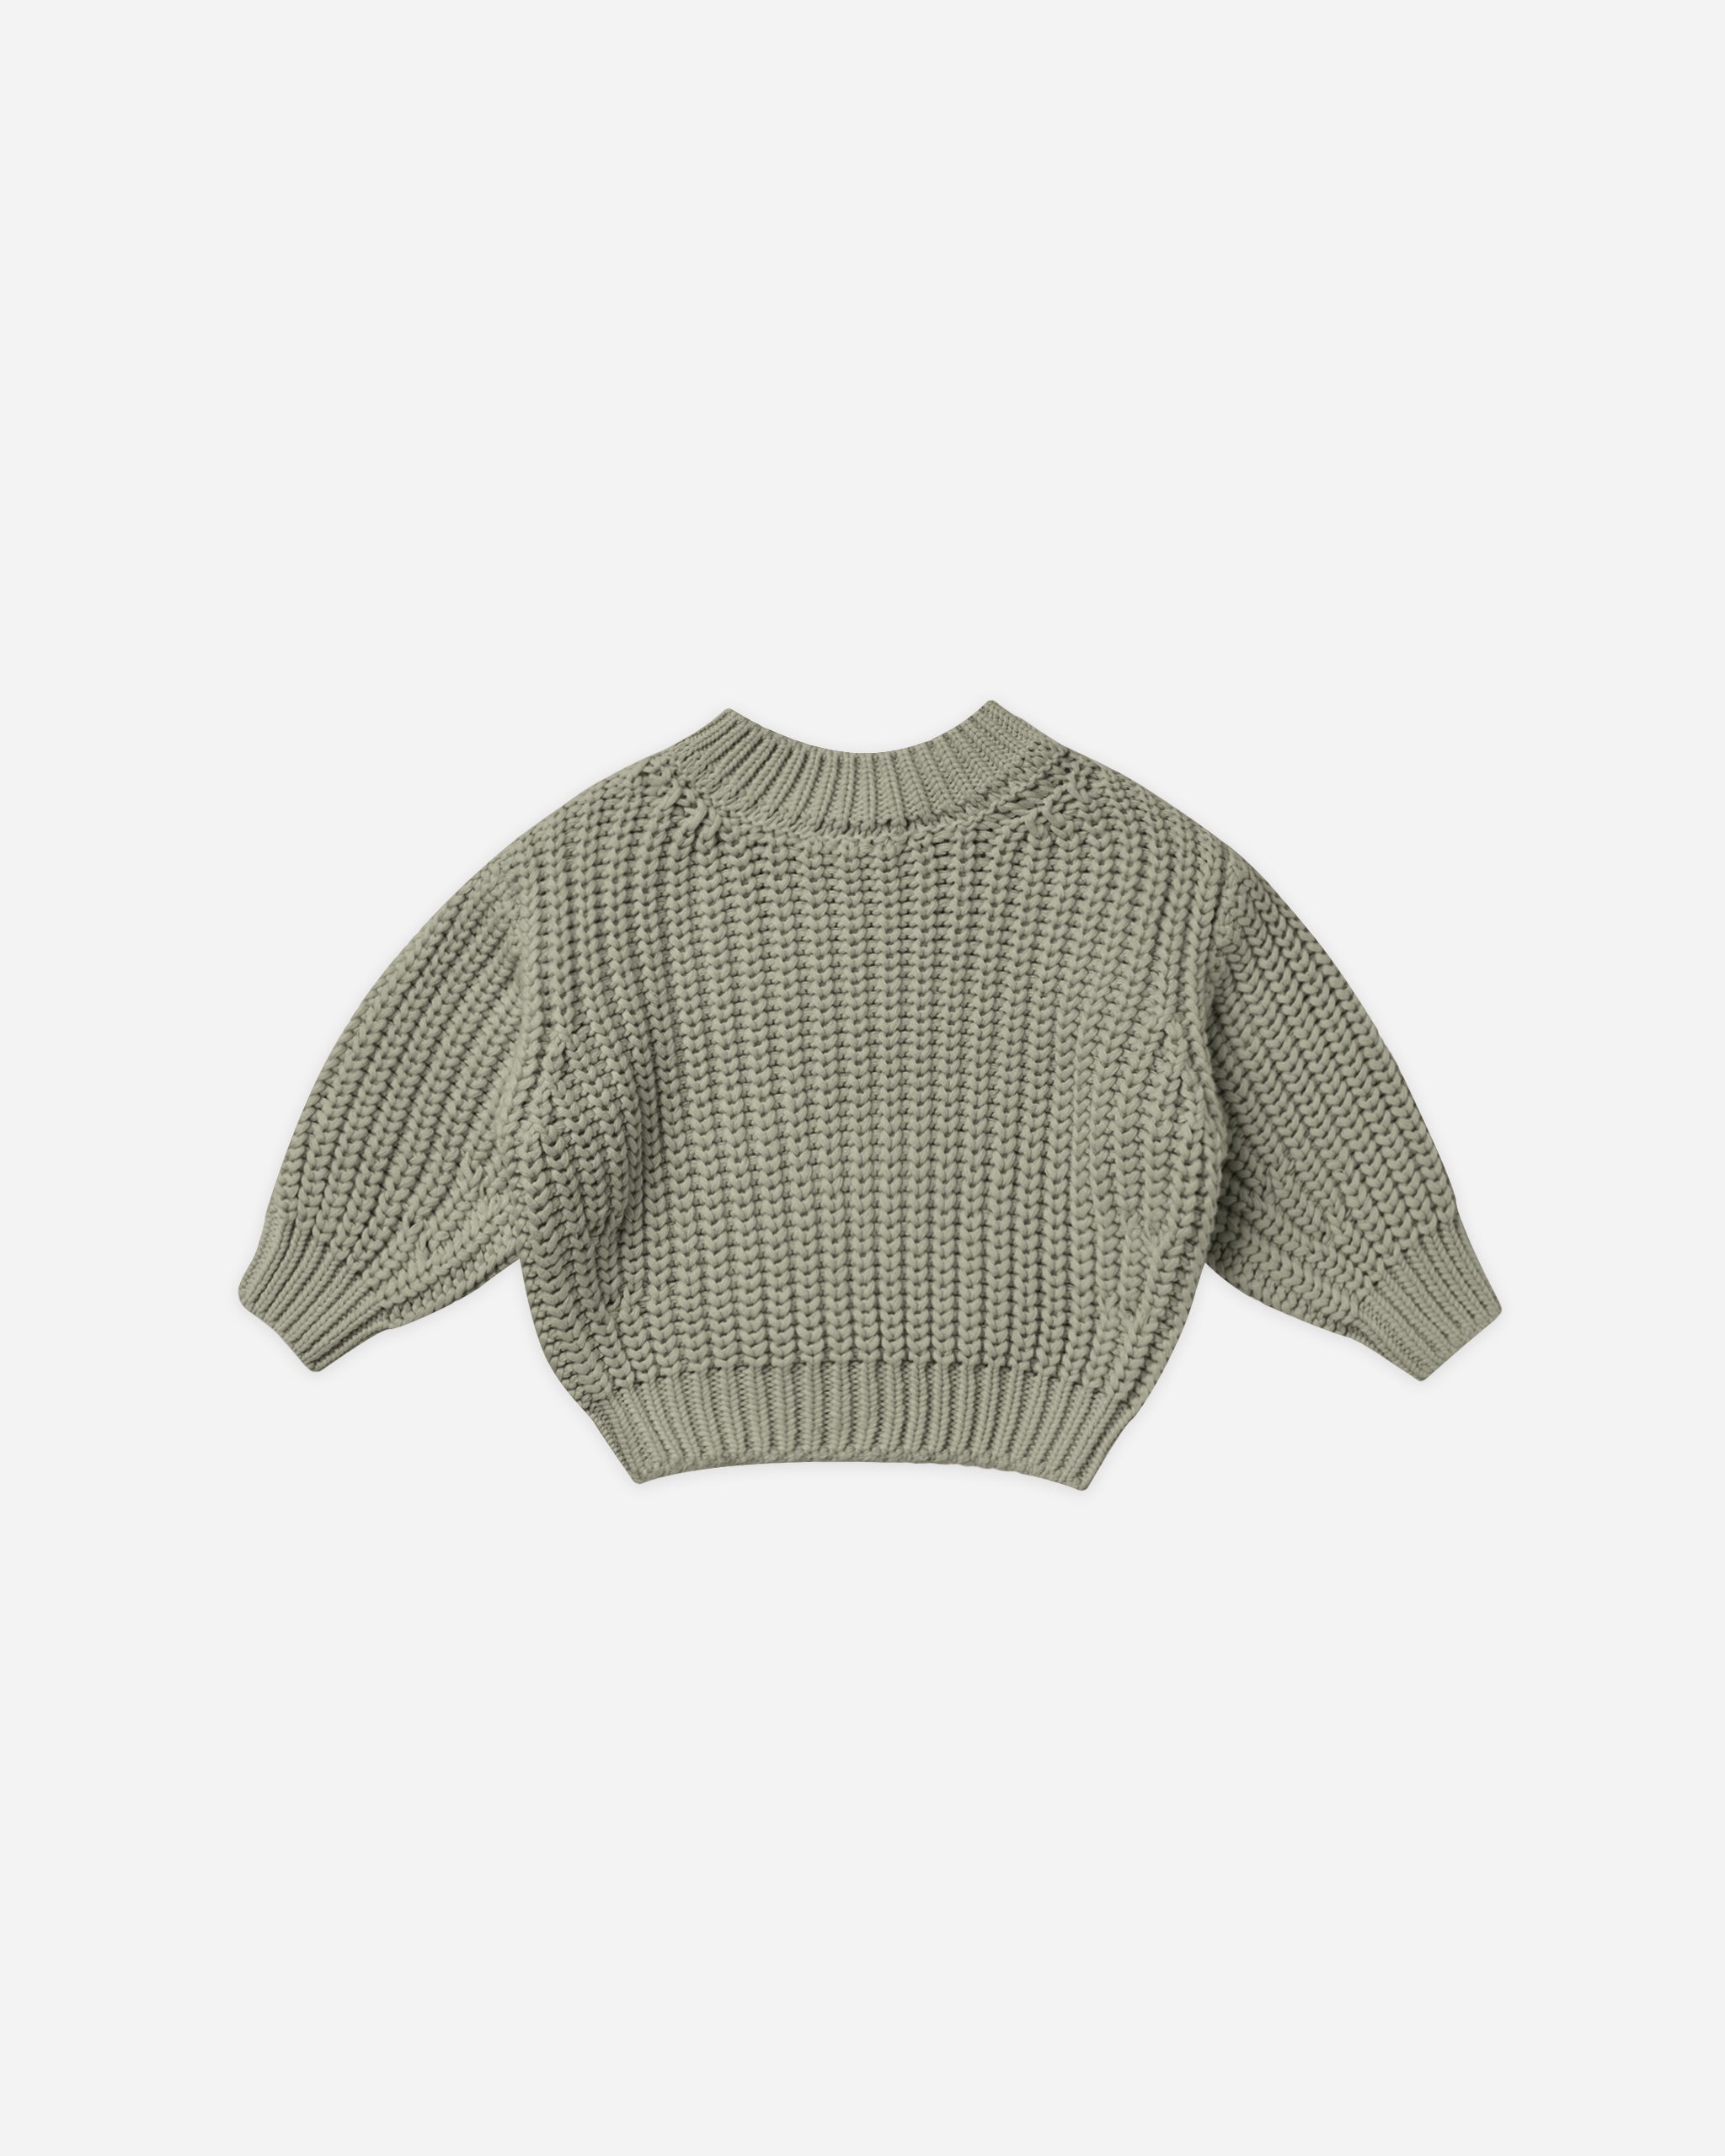 Chunky Knit Sweater || Basil - Rylee + Cru | Kids Clothes | Trendy Baby Clothes | Modern Infant Outfits |